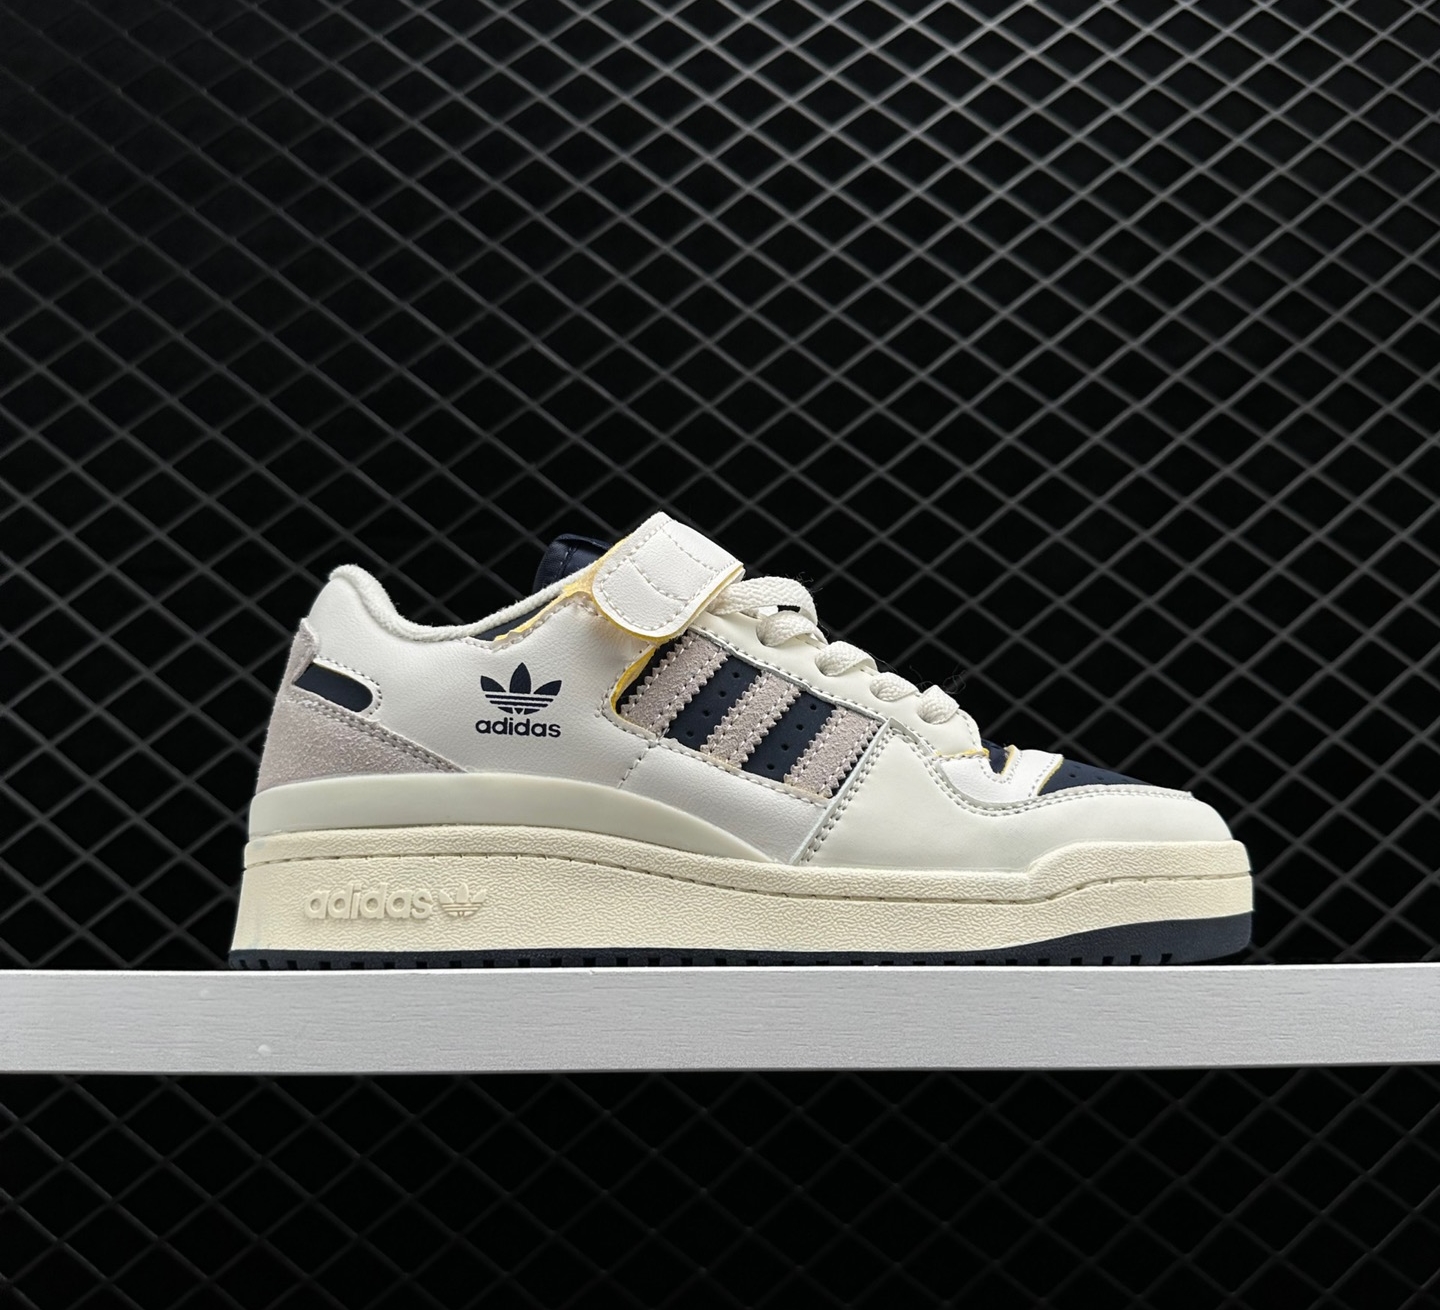 Adidas Forum 84 Low 'Off White Collegiate Navy' GZ6427 - Classic Style and Superior Comfort